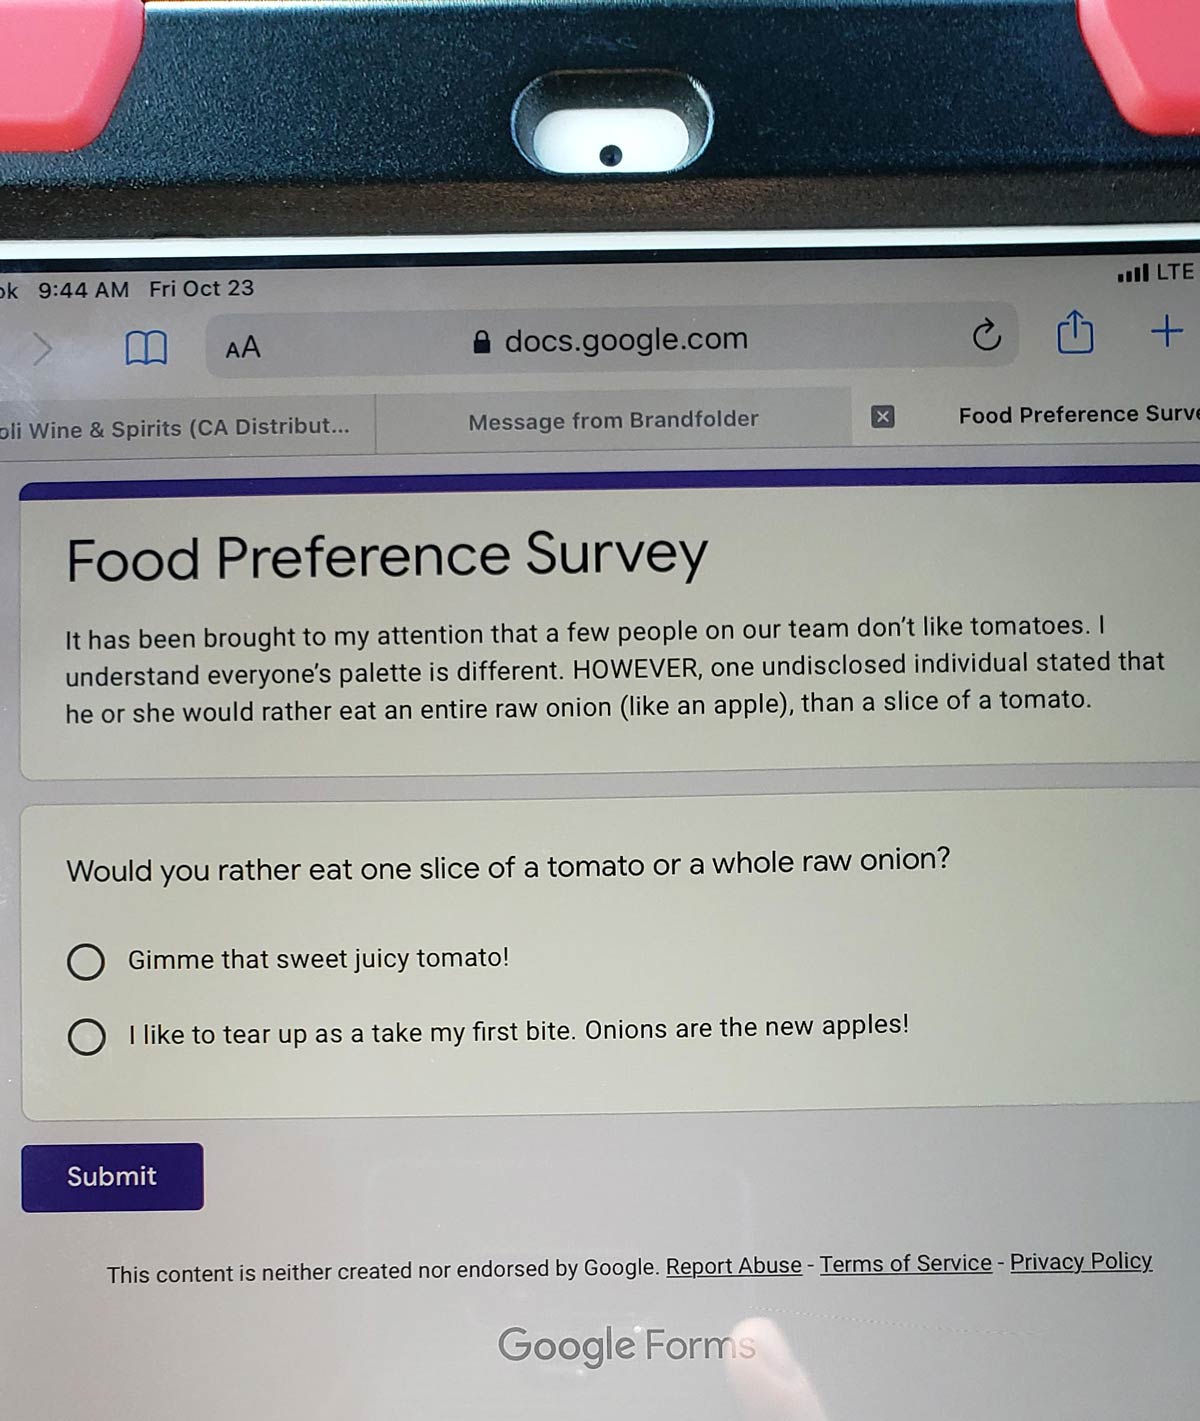 Yesterday during a lunch meeting I told my big boss that I absolutely despise tomatoes and I would rather eat a raw onion whole. Today he sent this company wide survey